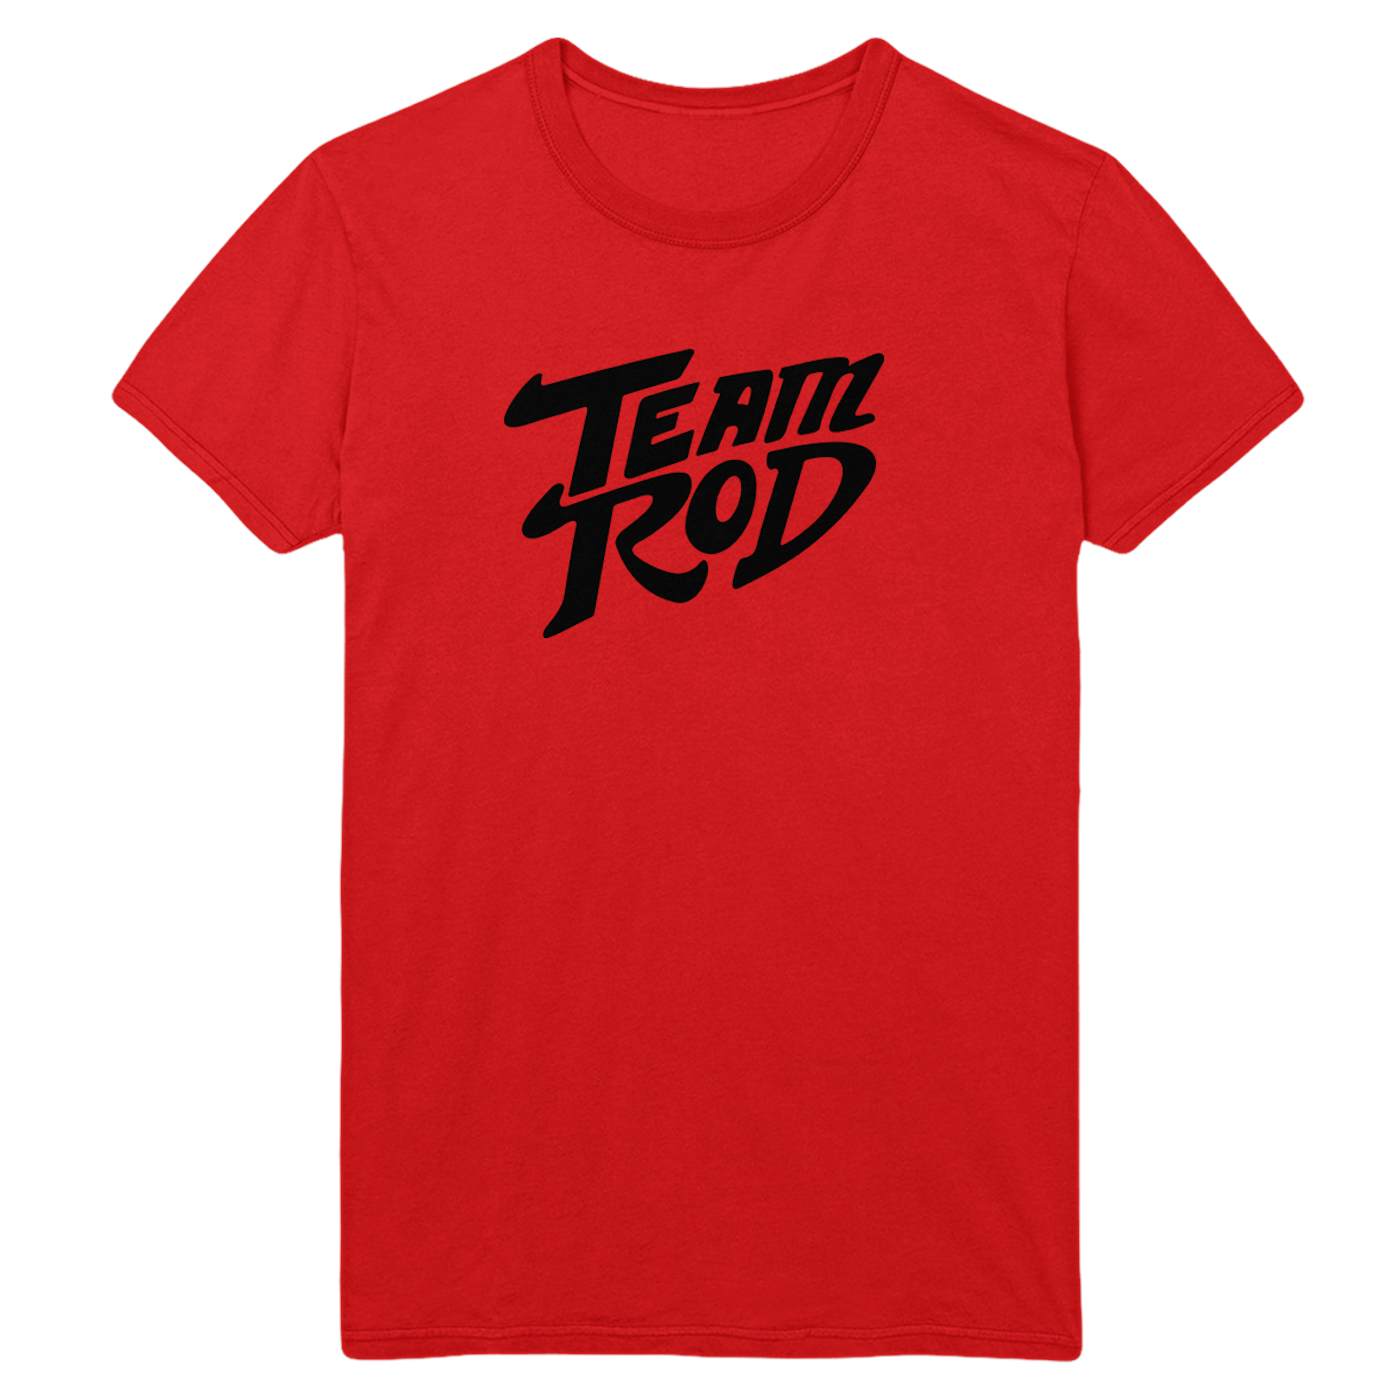 The Lonely Island Team Rod Tee